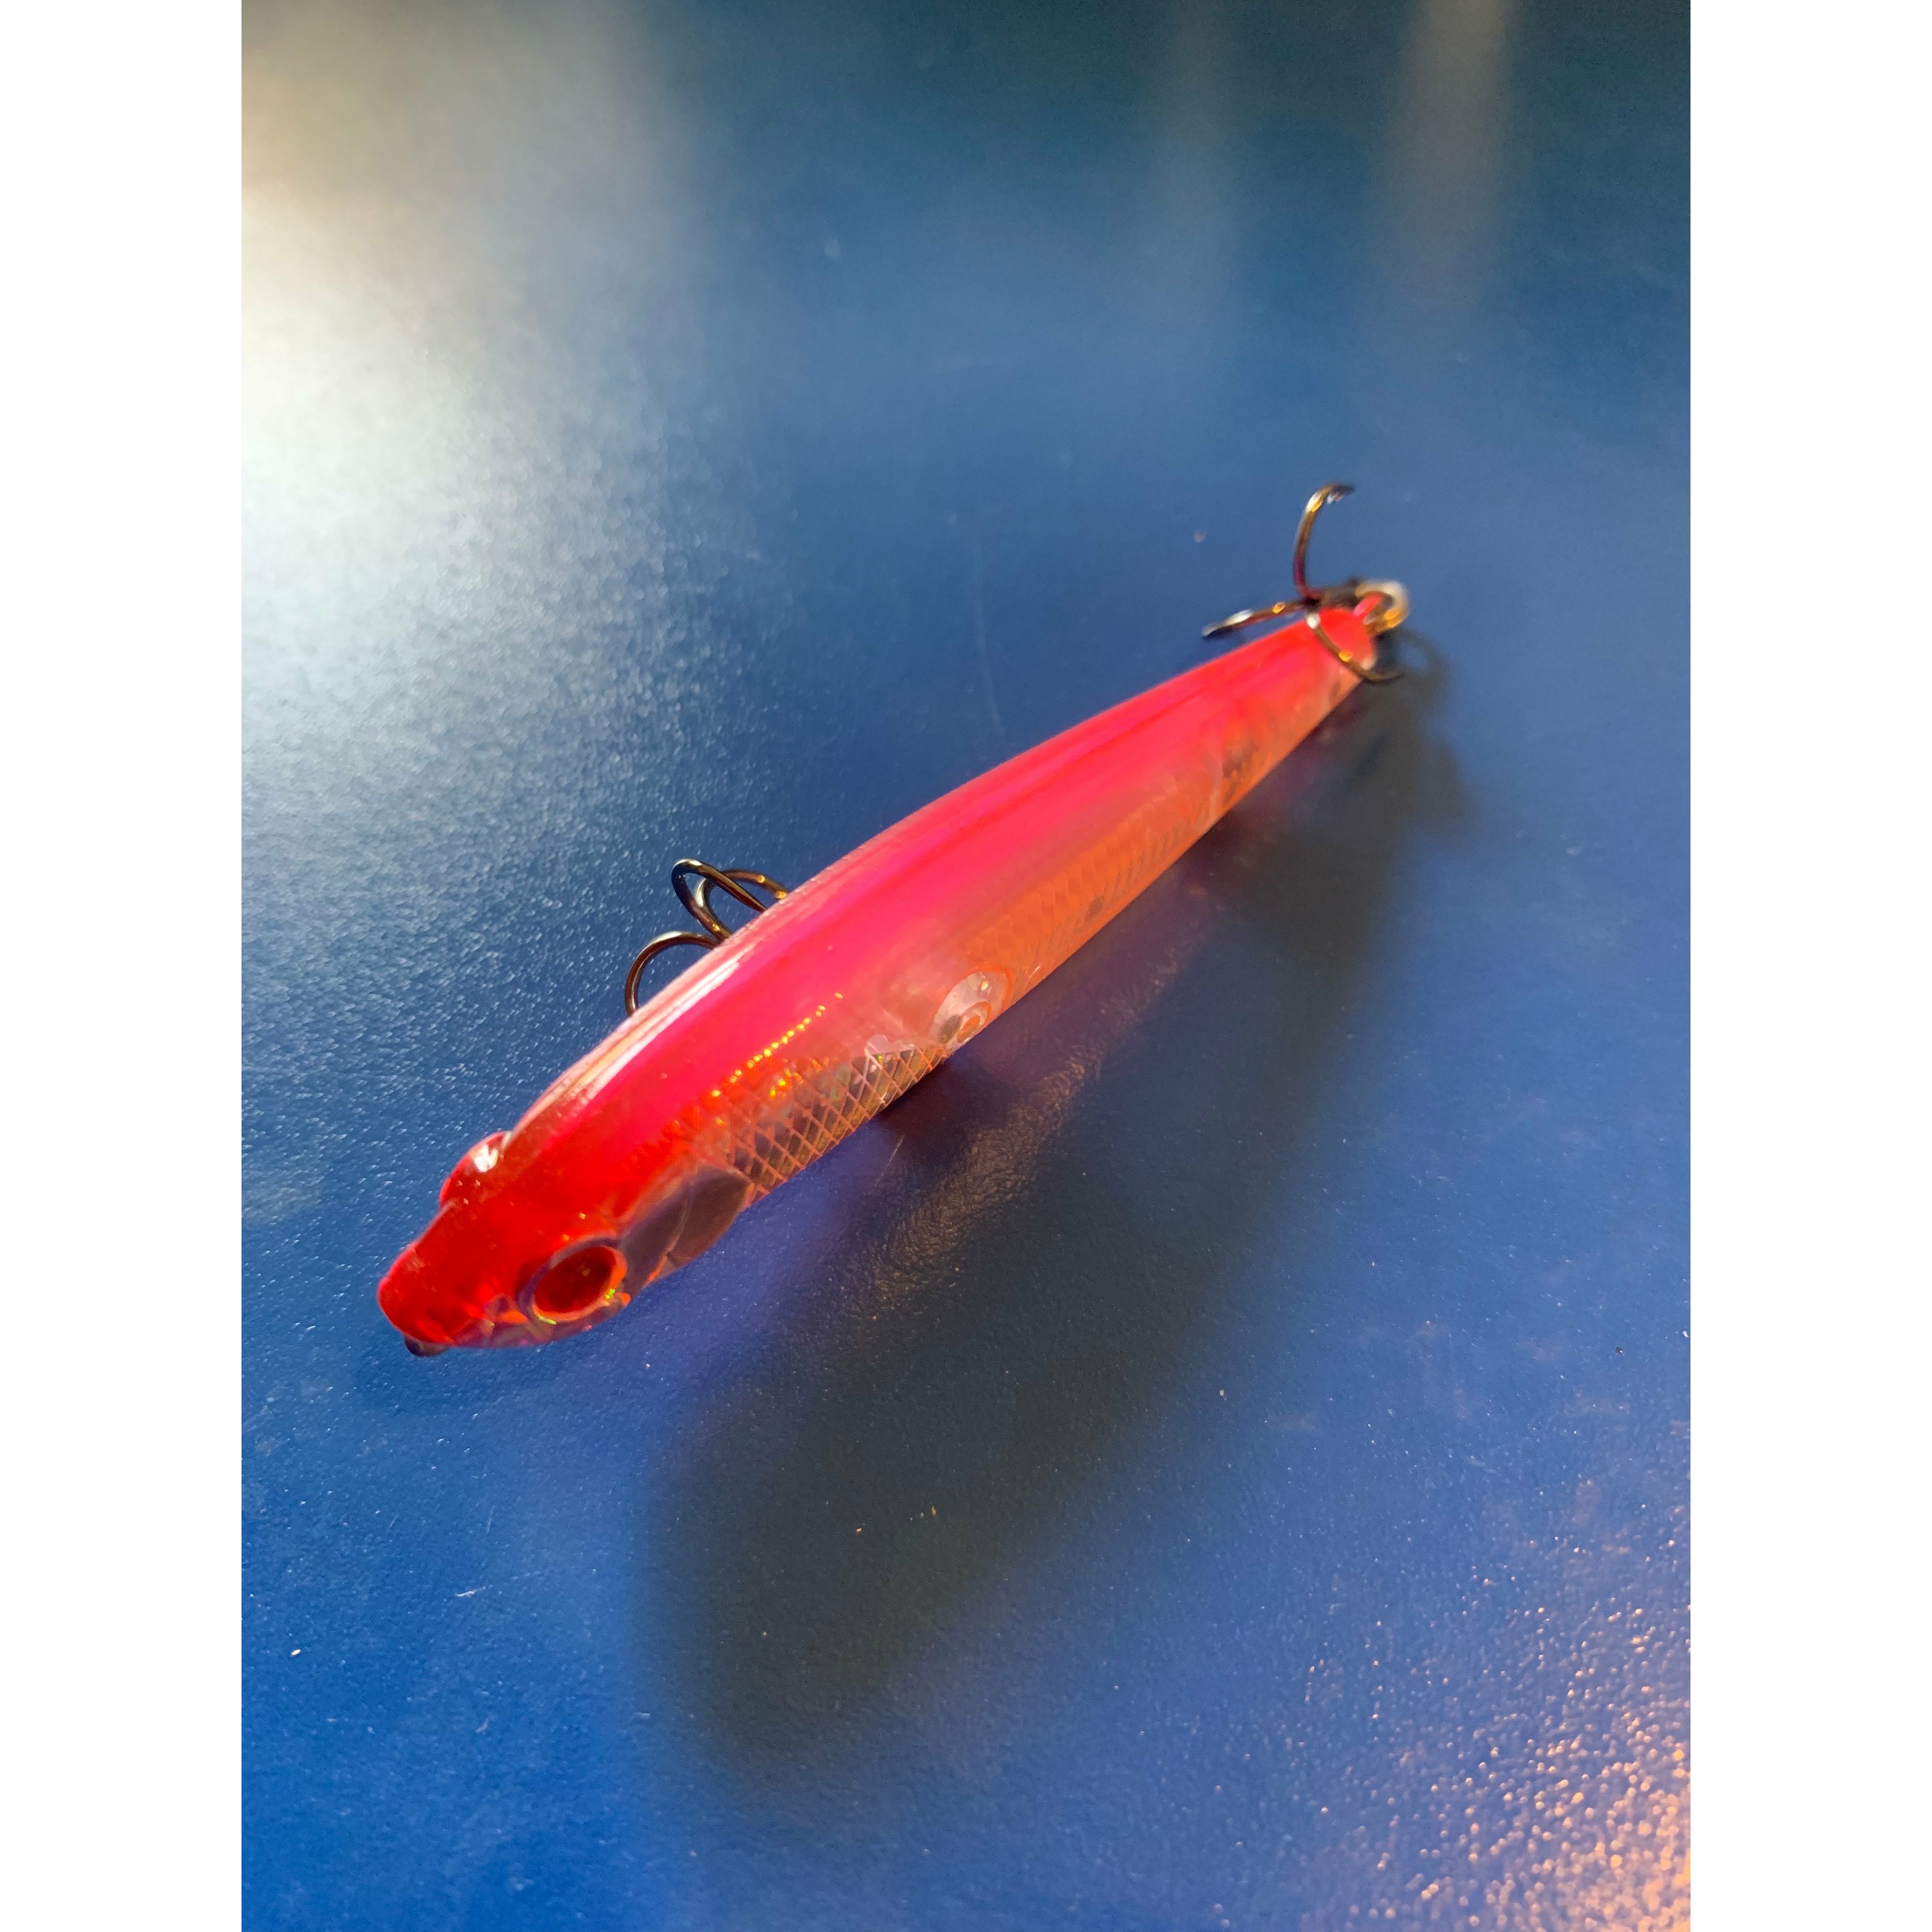 Fishing Lure Top water Chase bait 70mm 4g